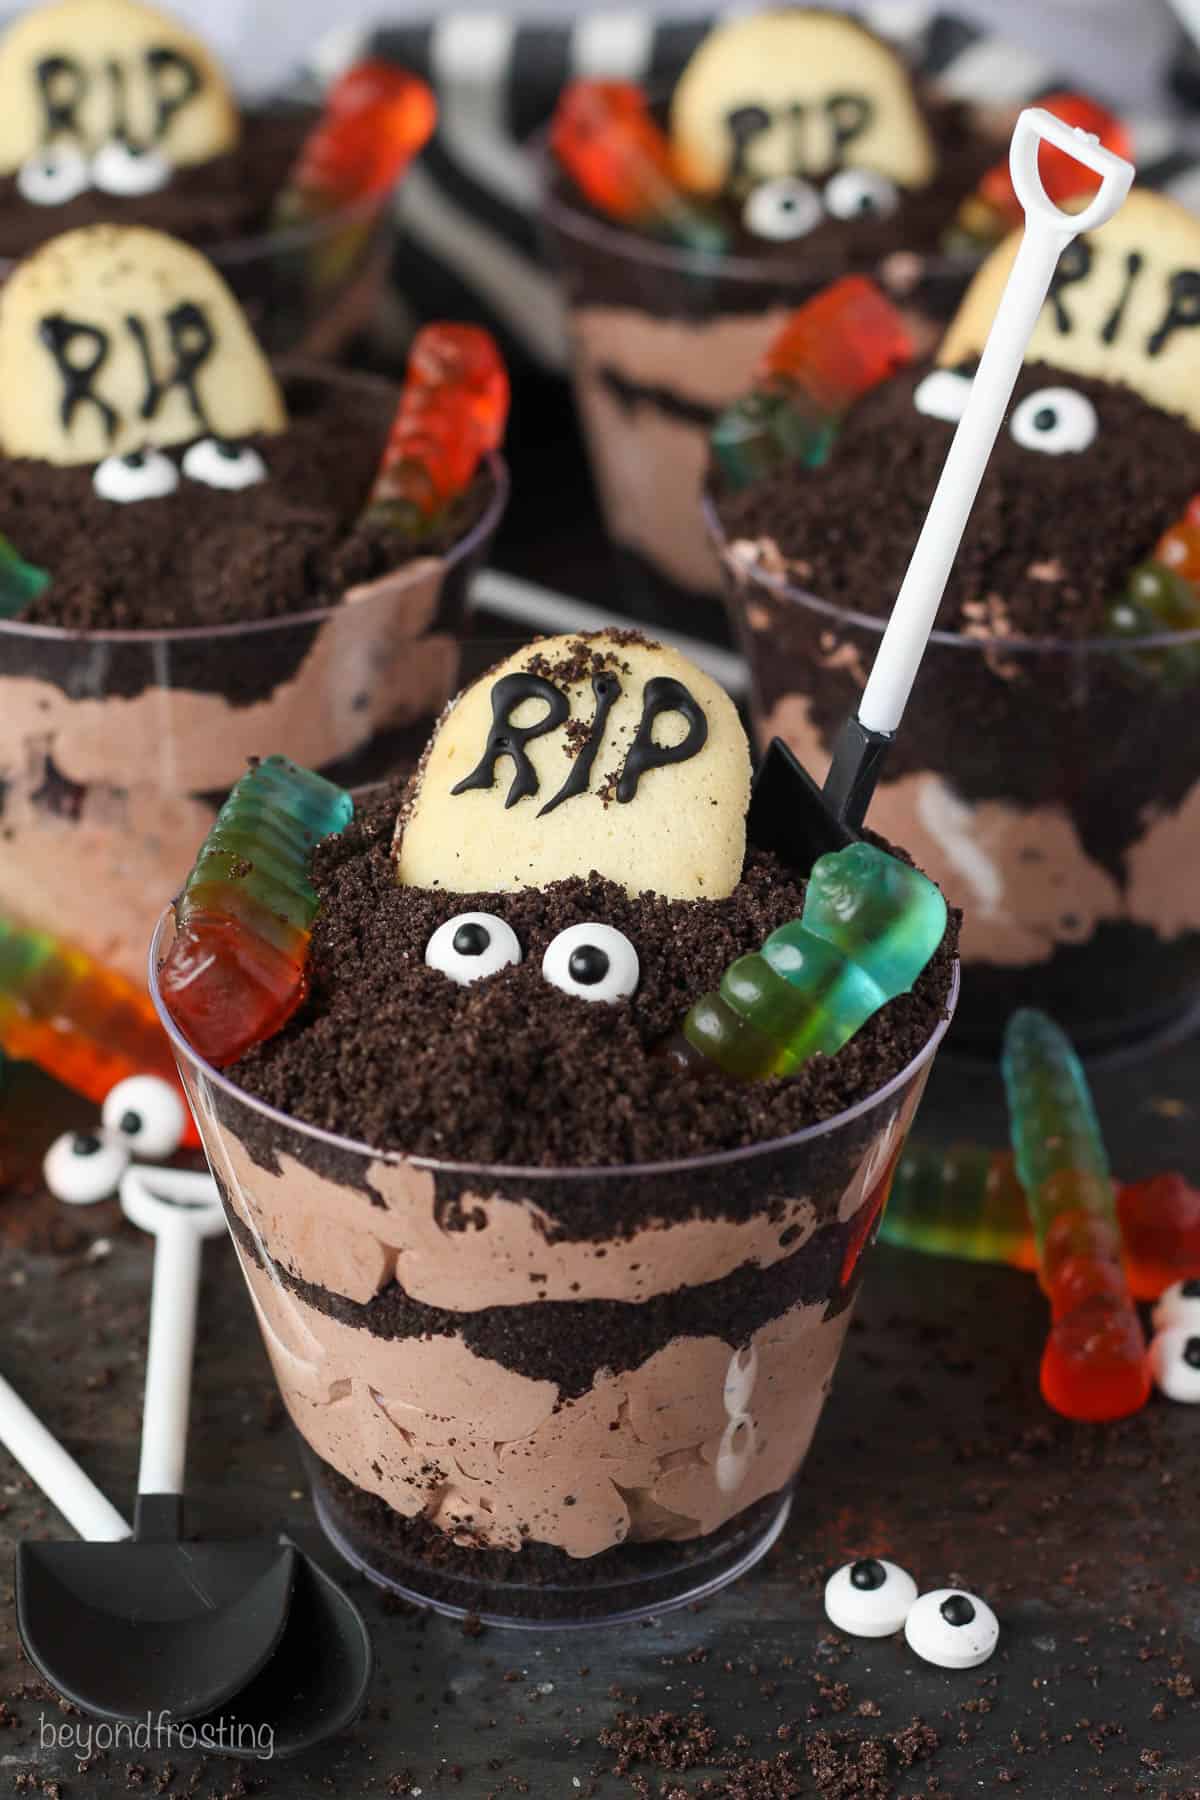 Assorted Halloween dirt cups decorated with Milano cookie headstones, candy eyes, and gummy worms.